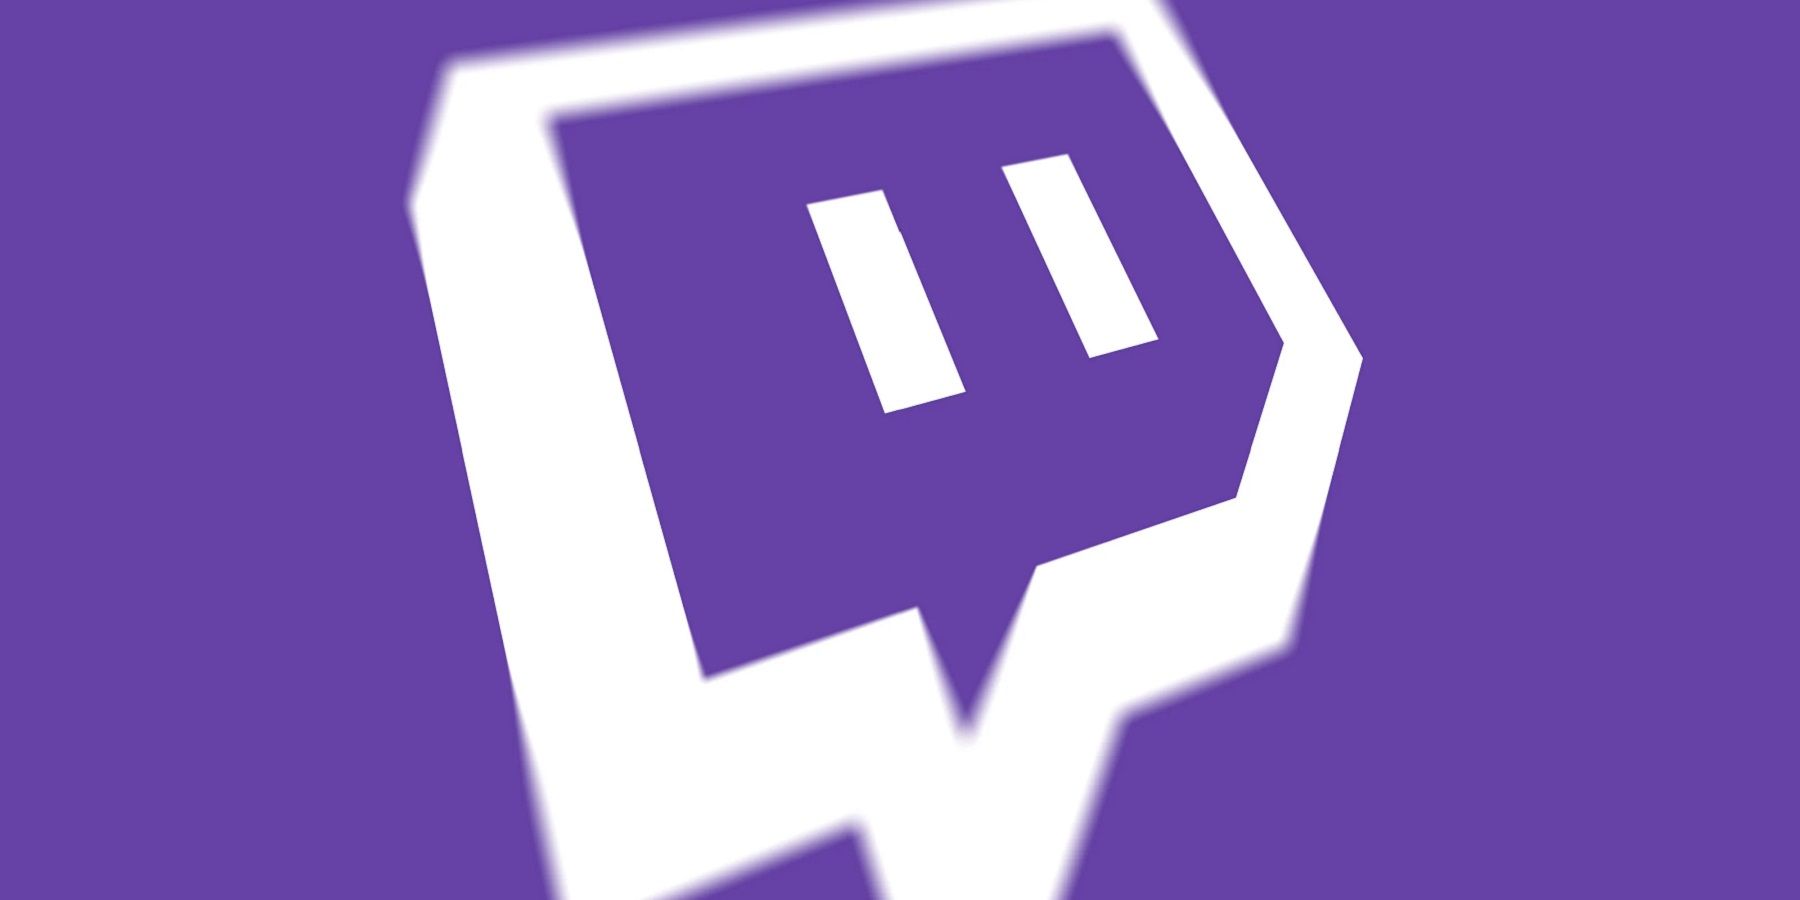 The Twitch logo on a bright purple background.